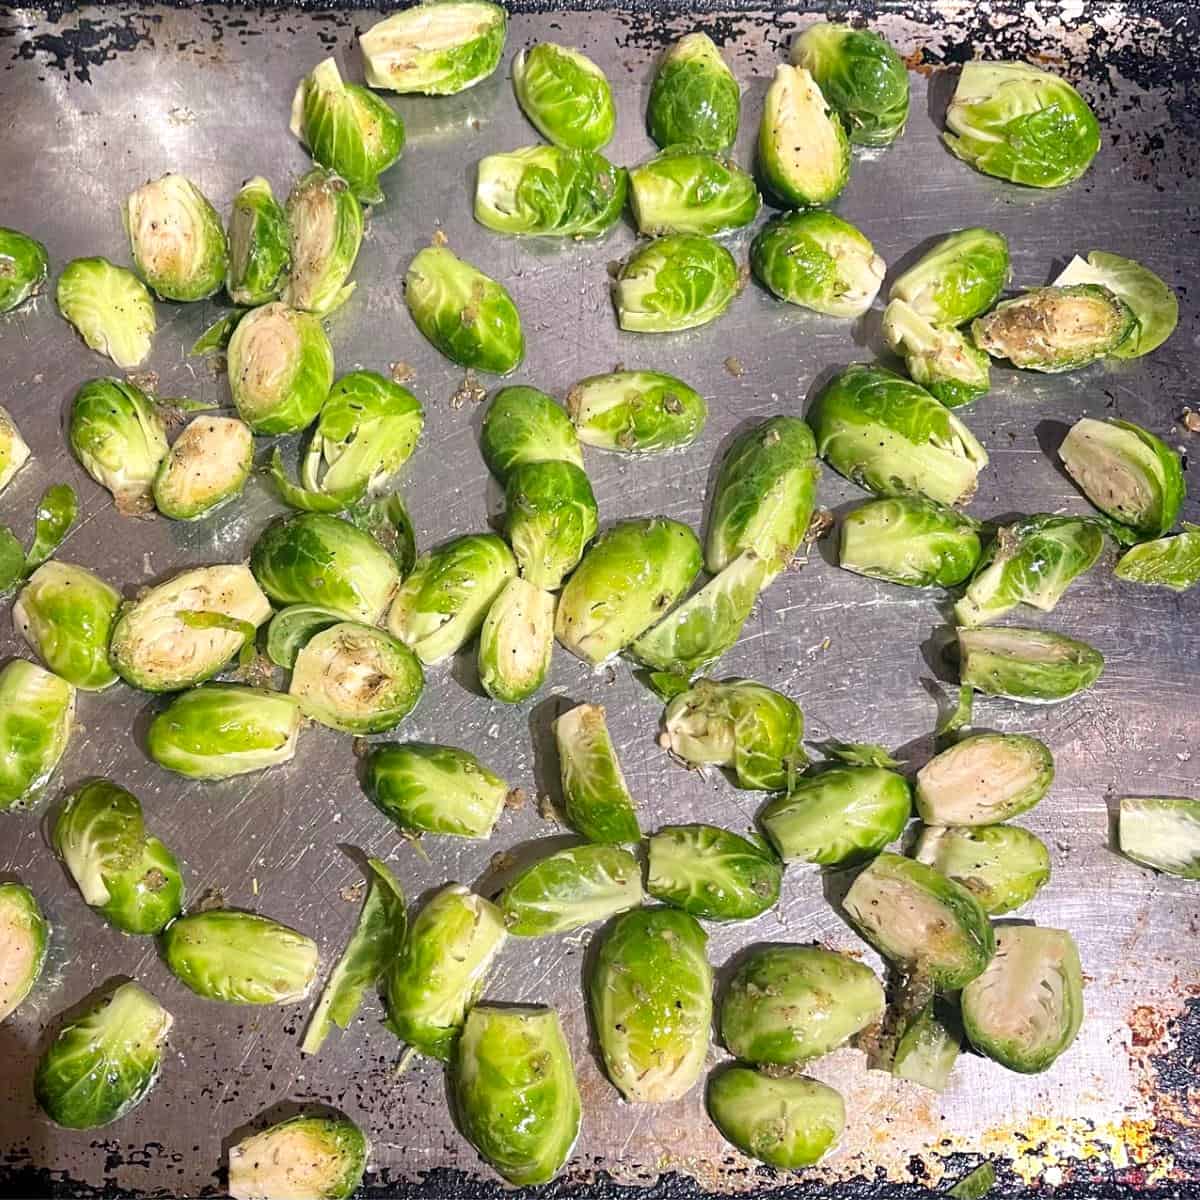 Brussels sprouts on baking sheet before roasting.